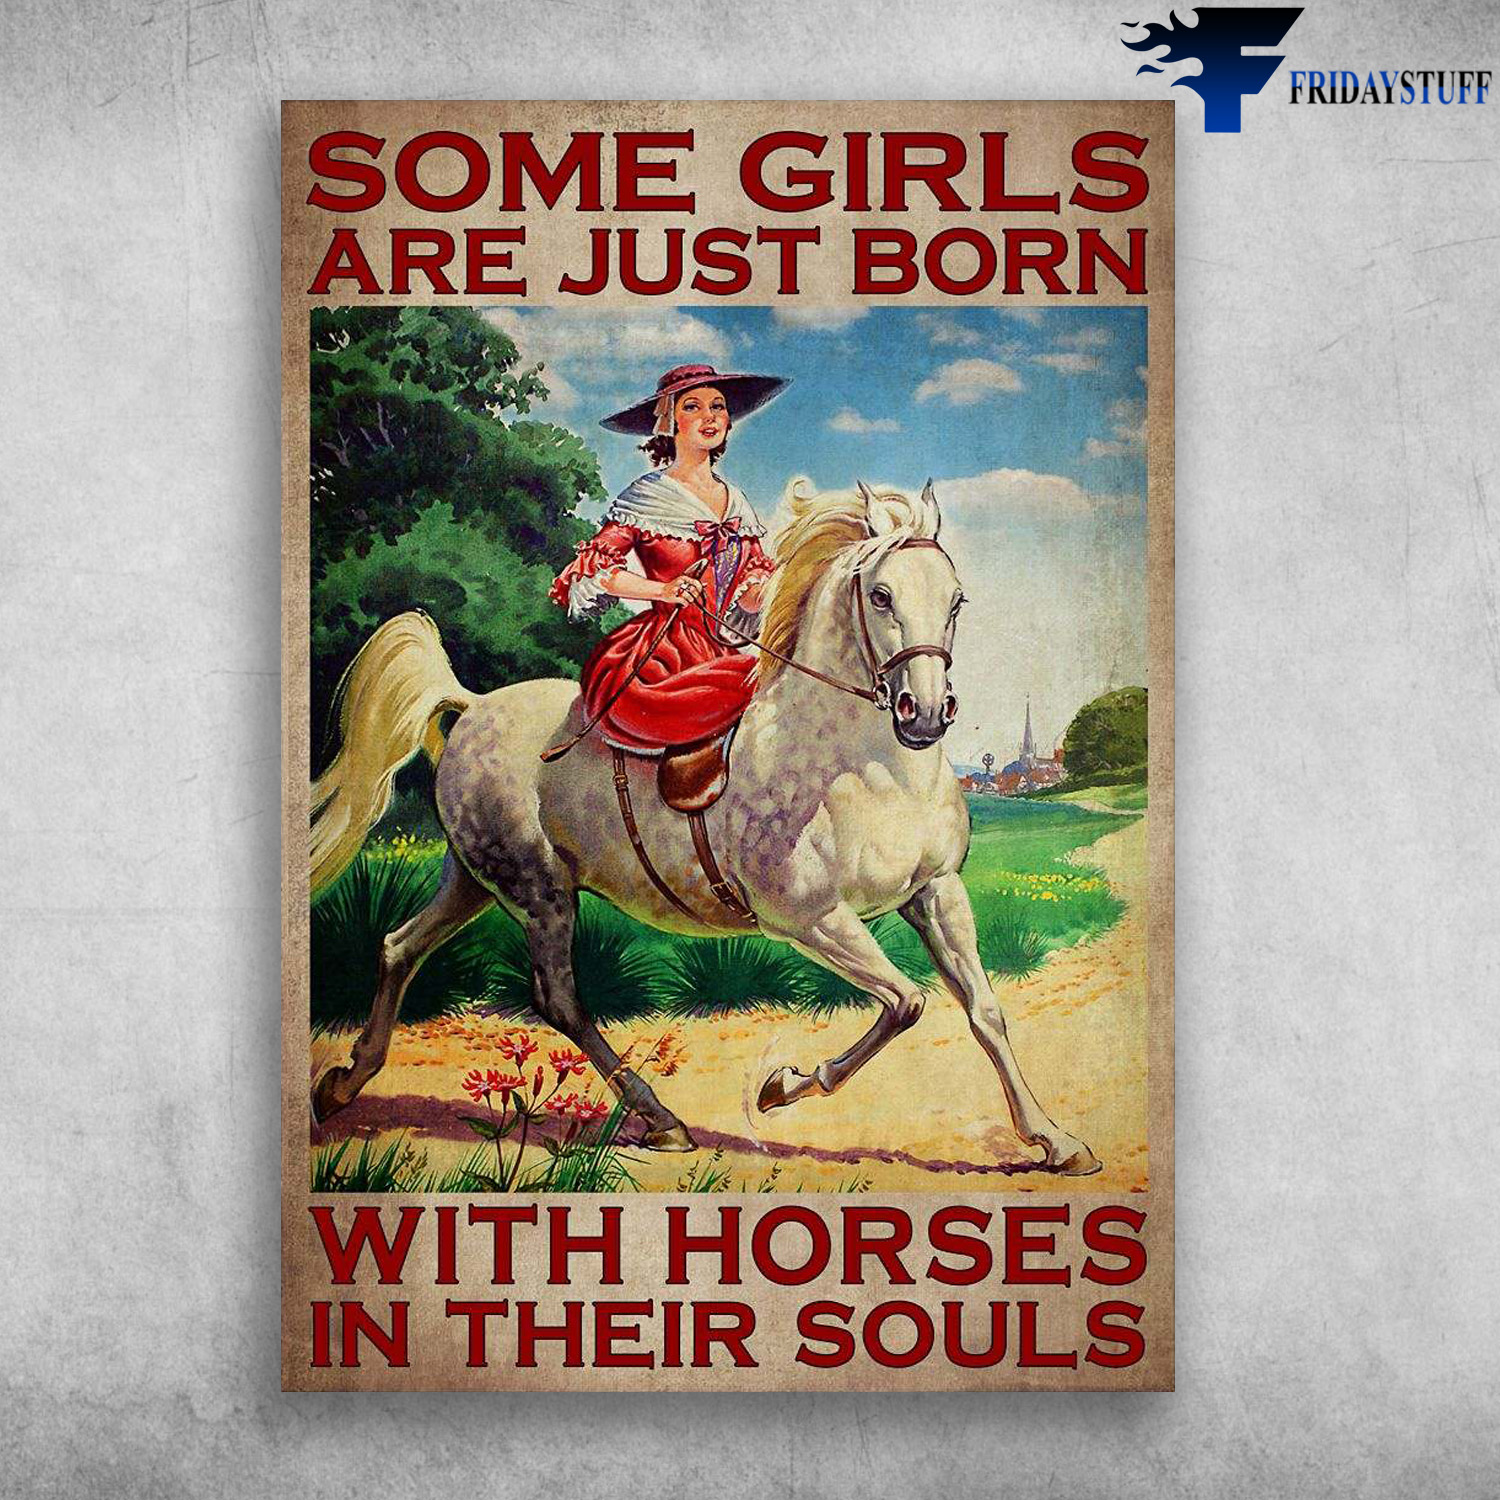 Lady Riding Horse, Some Girls Are Just Born, With Horses In Their Souls